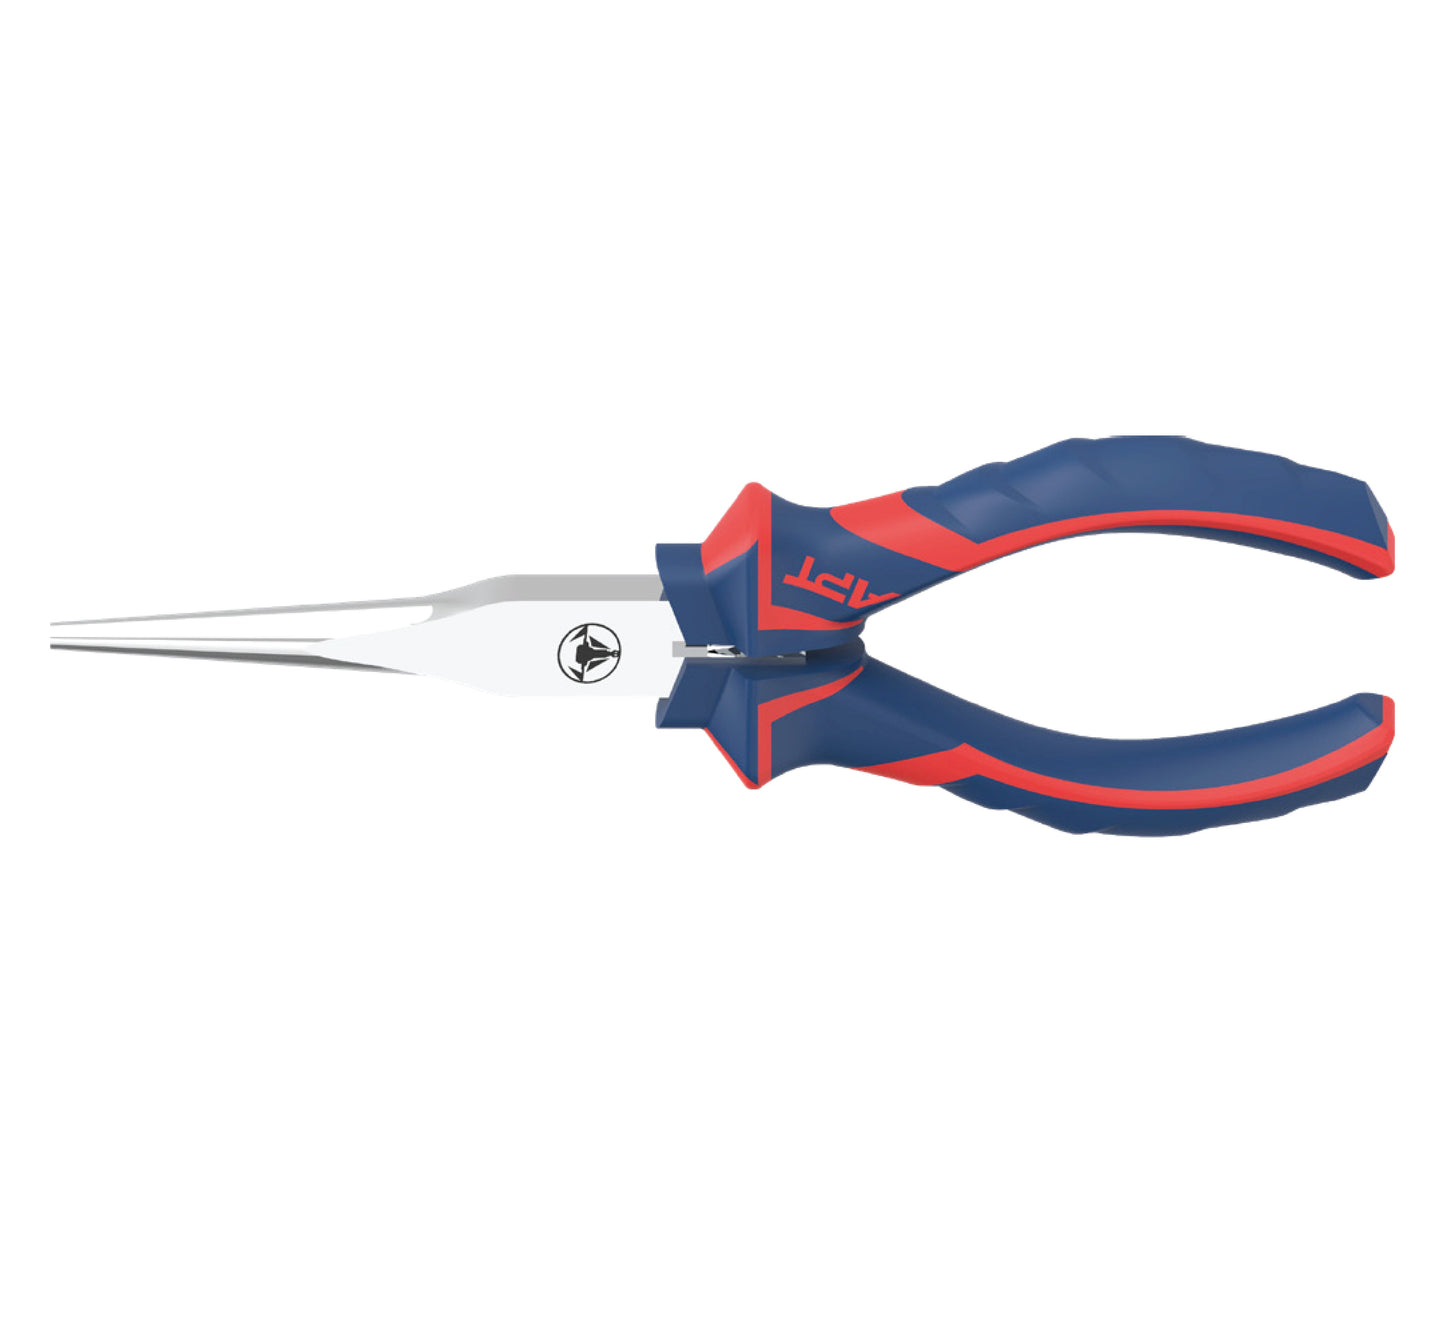 APT MINI LONG NEEDLE NOSE PLIER 6" NEW APT 2 COLOR HANDLE-NEW APT PP CARD WITH RED STRAP- AH1437546-150G